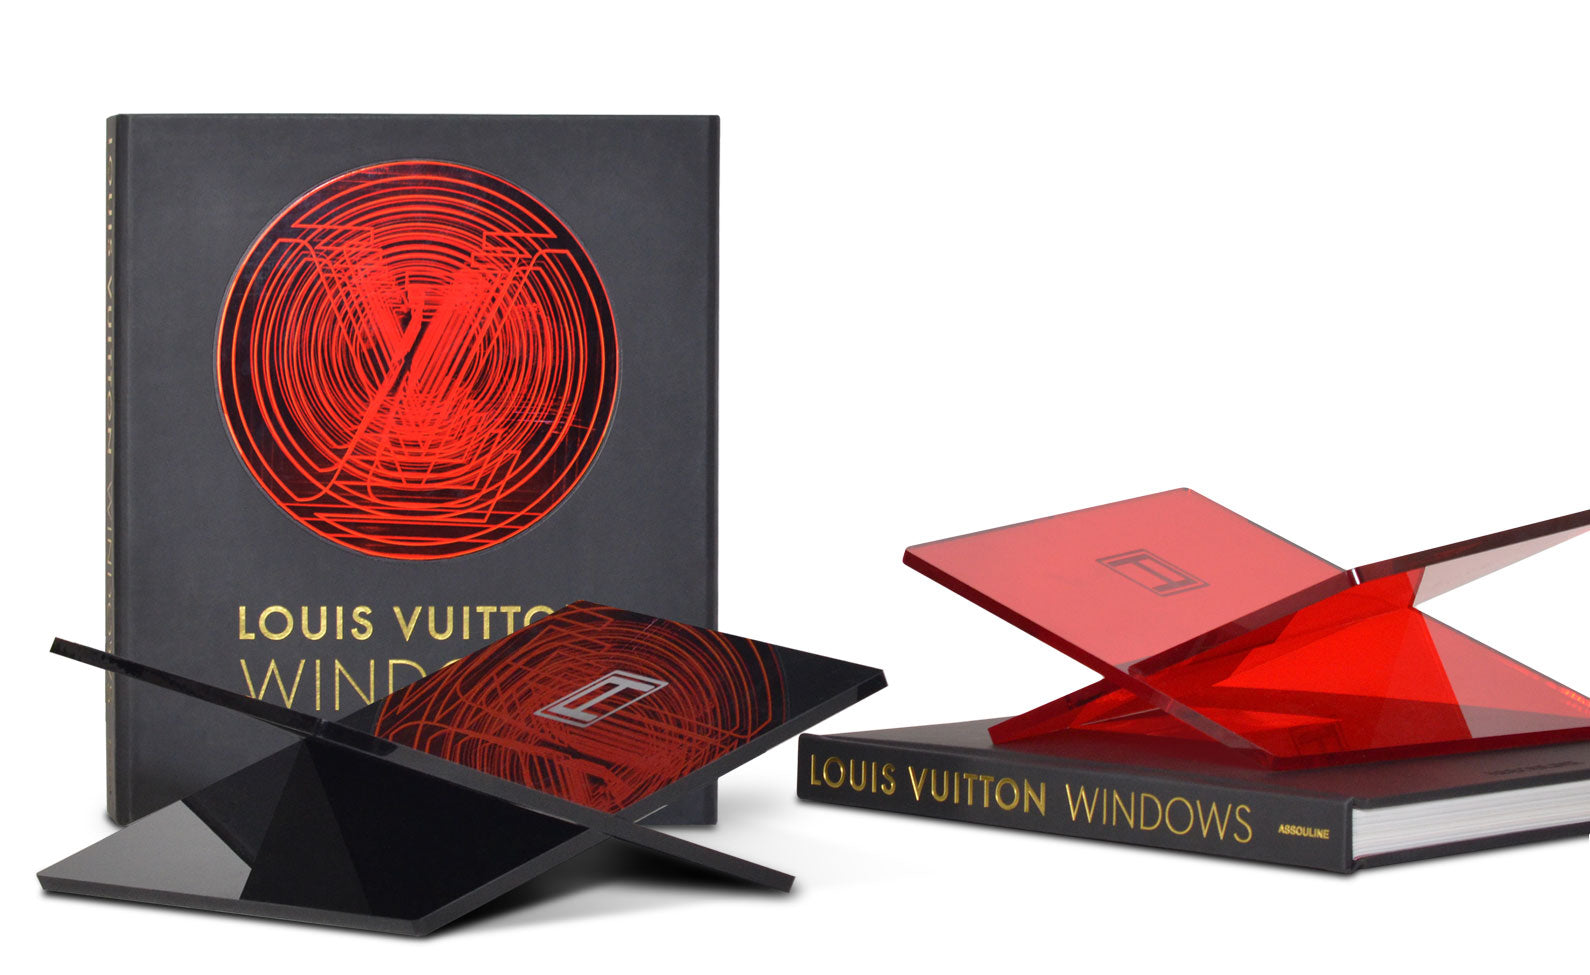 Best Louis Vuitton Coffee Table Book | IQS Executive